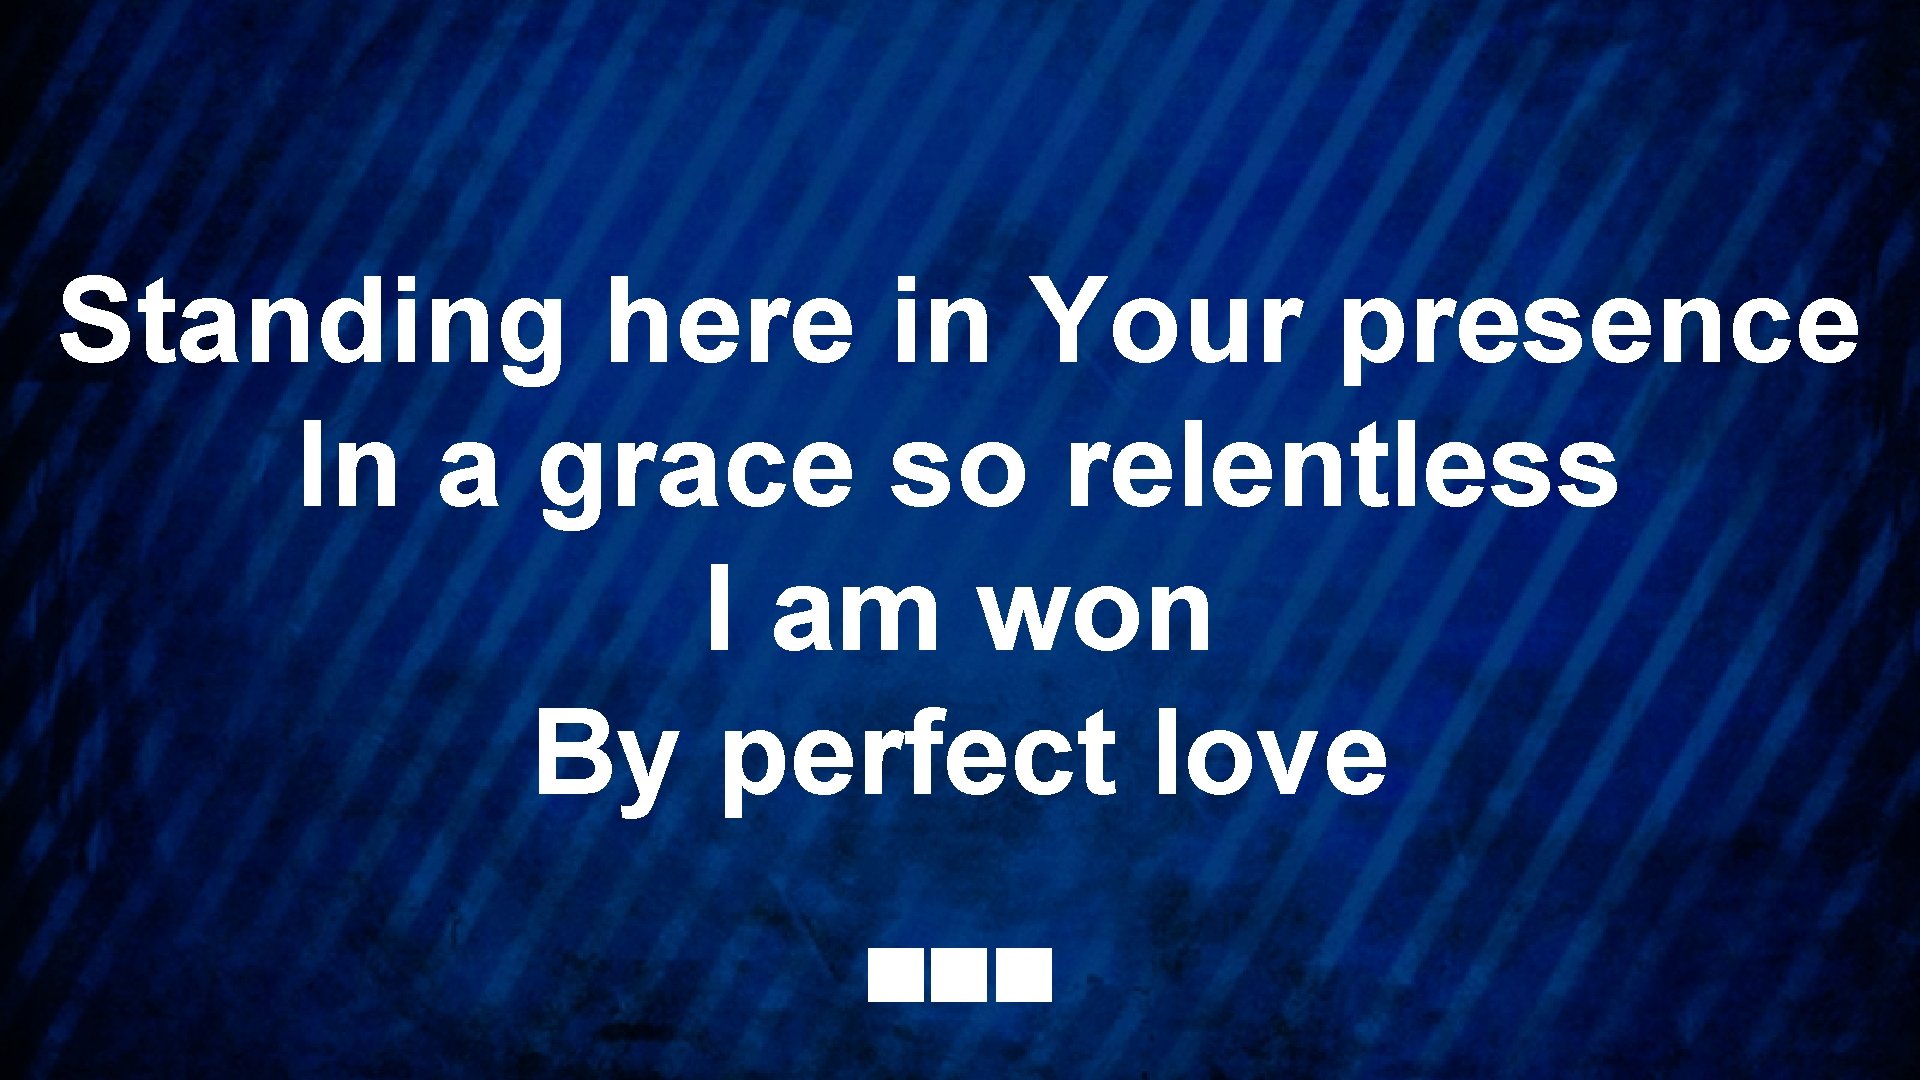 Standing here in Your presence In a grace so relentless I am won By